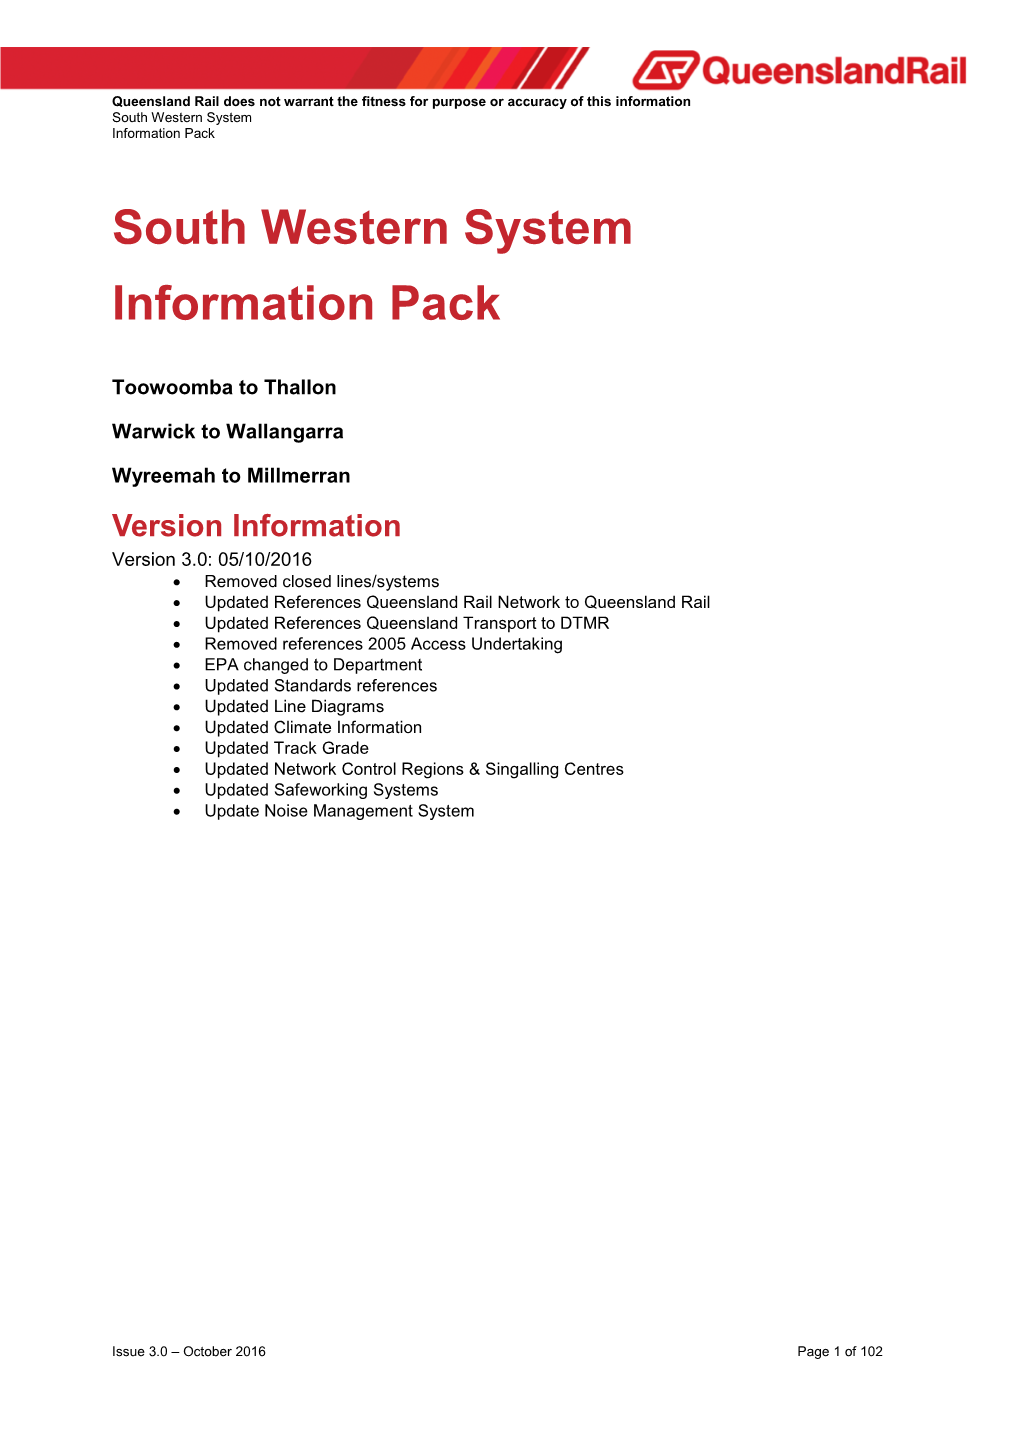 South Western System Information Pack